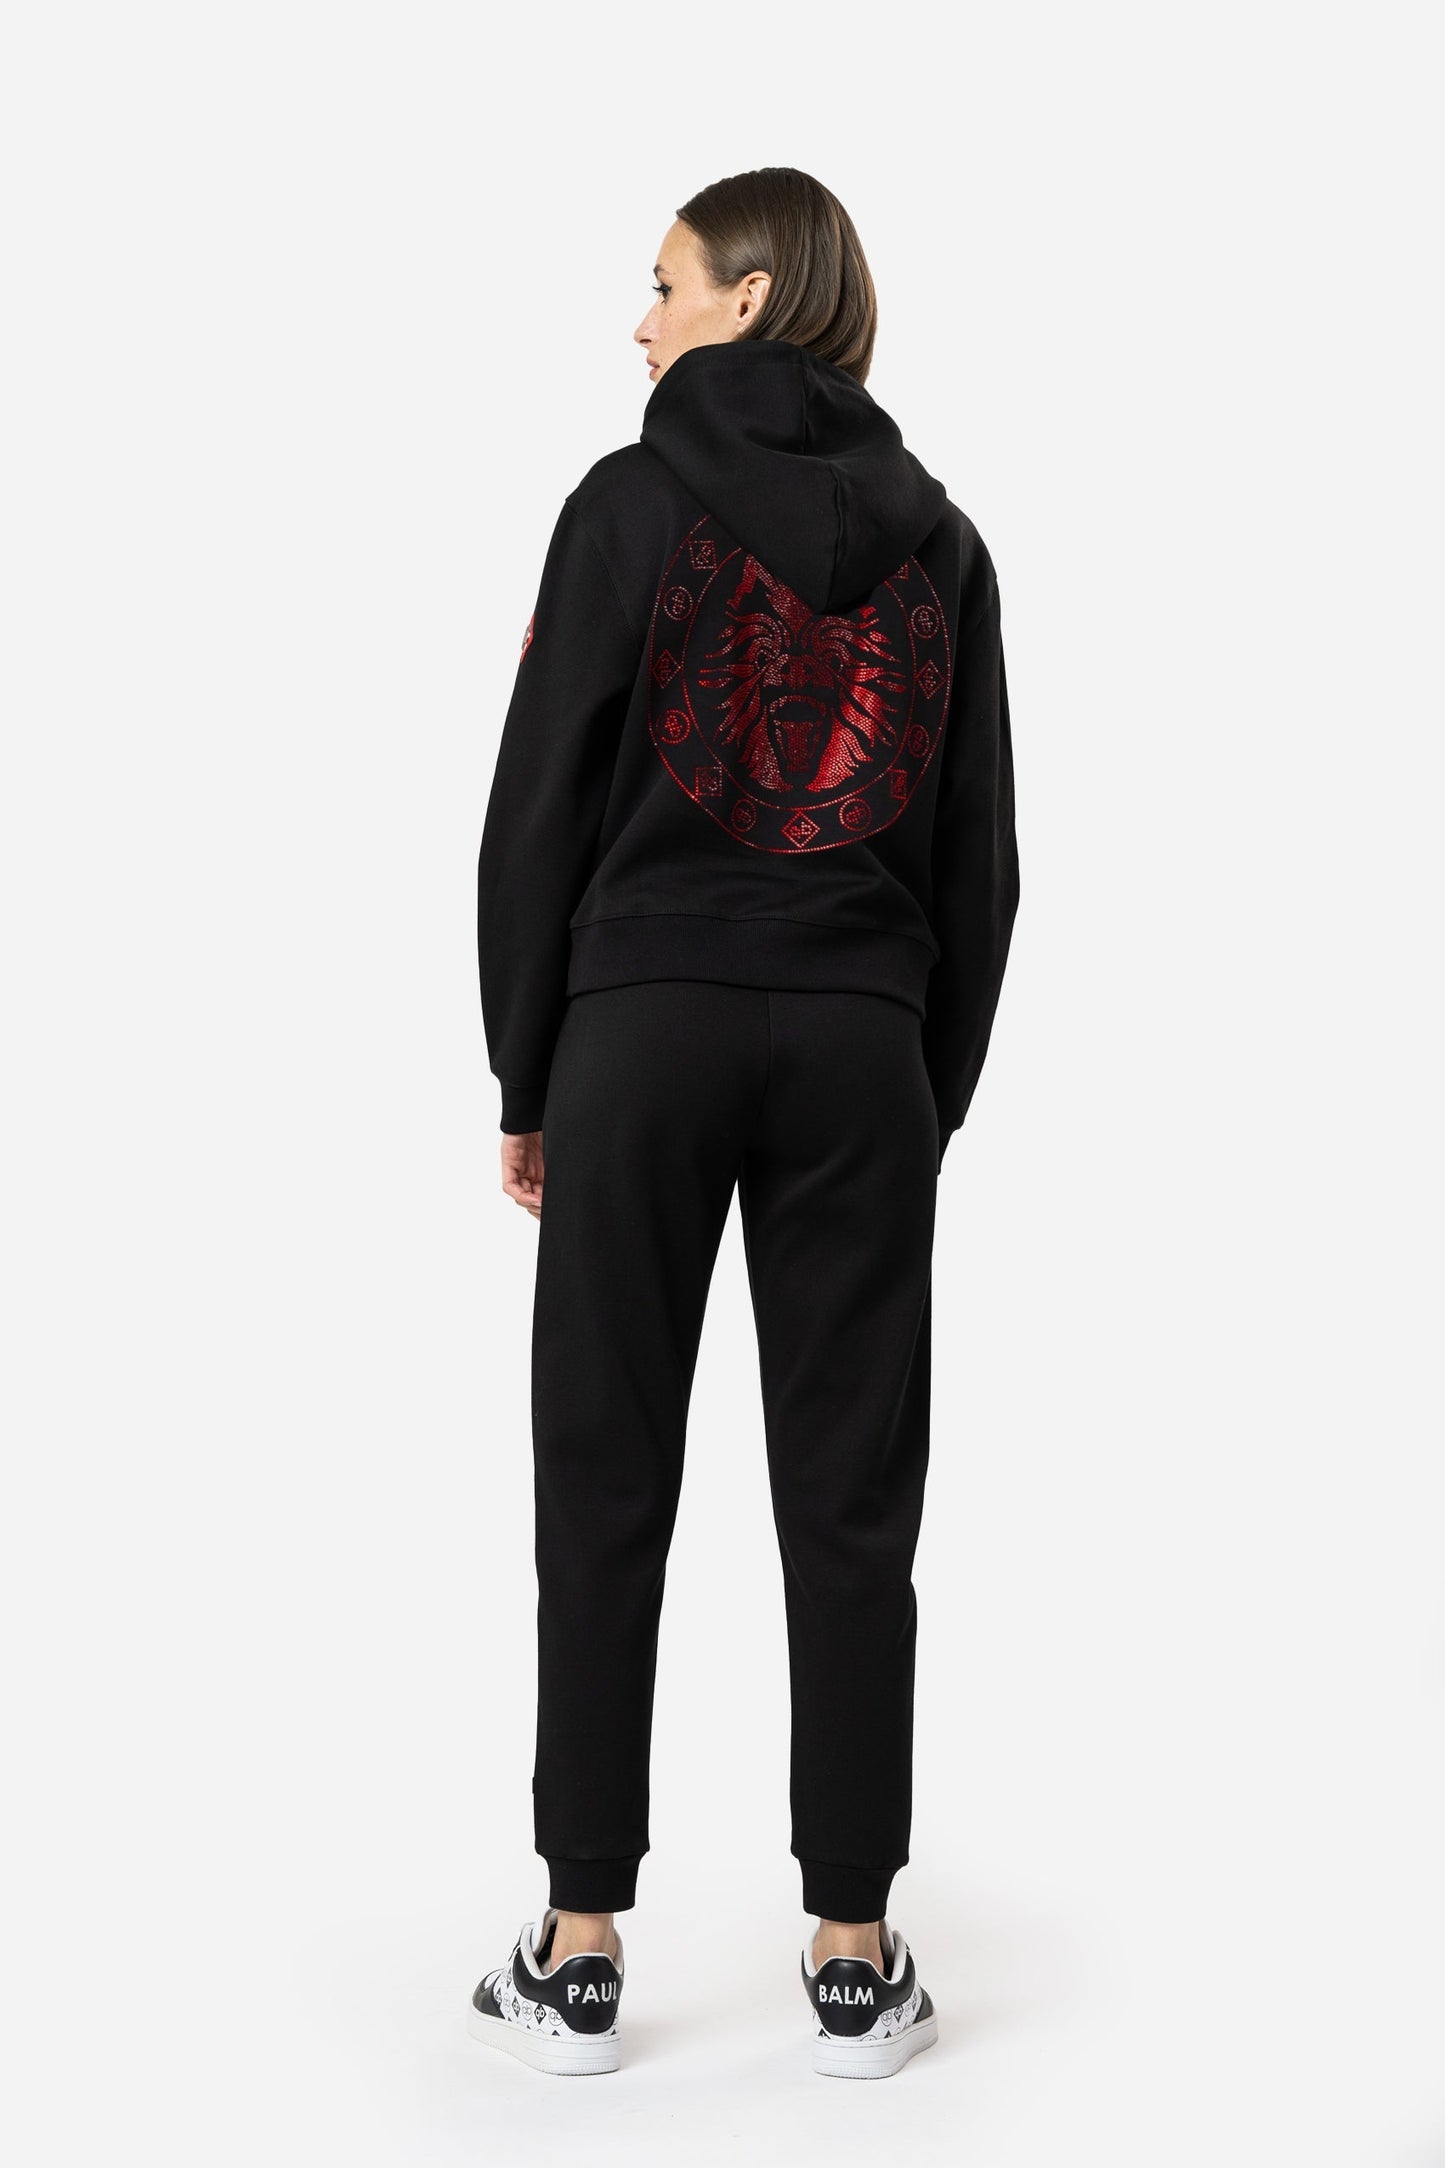 PAUL BALM Embroidery red Hoodie